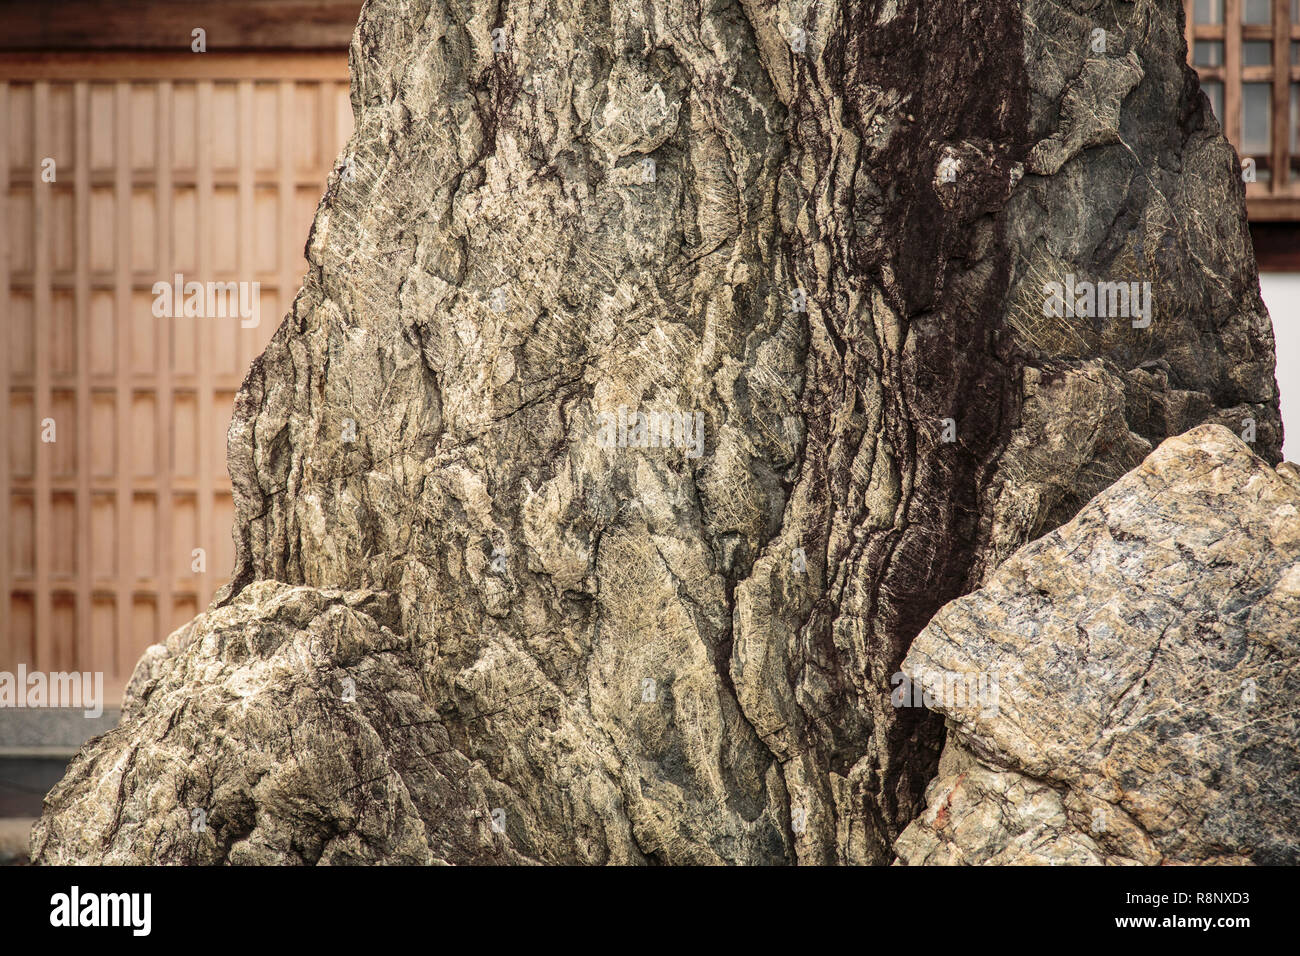 Close-up of huge rock in a garden at Ryoanji temple in Kyoto. Stock Photo